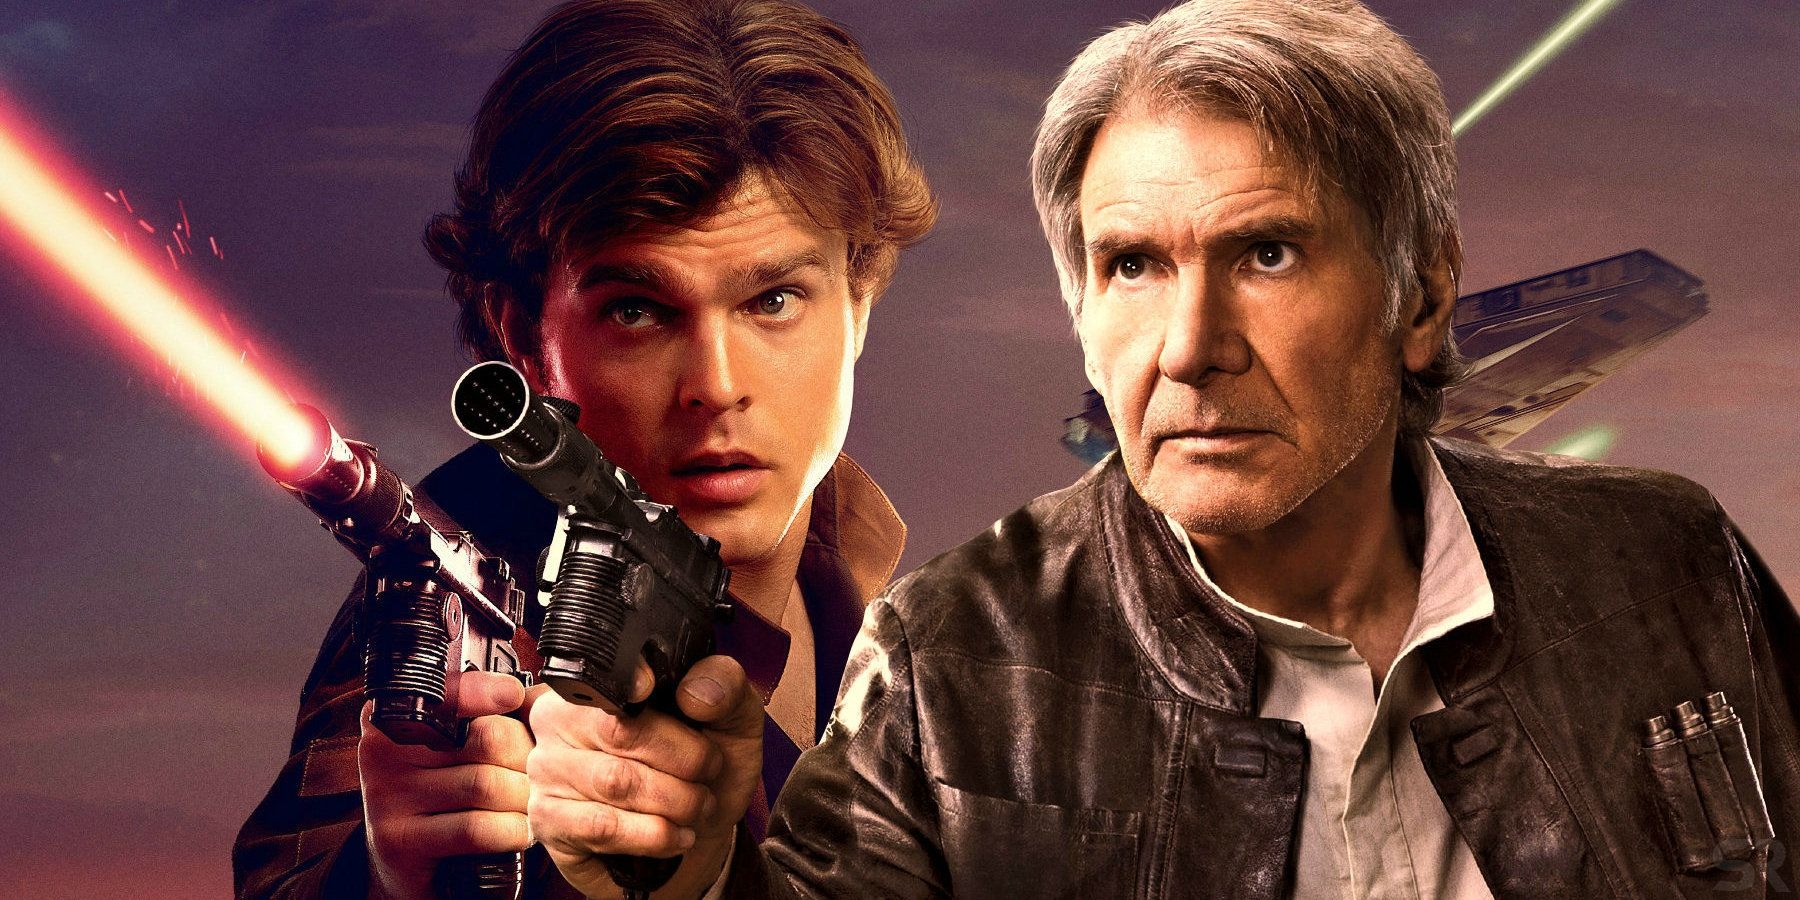 How Old Is Han Solo in A New Hope